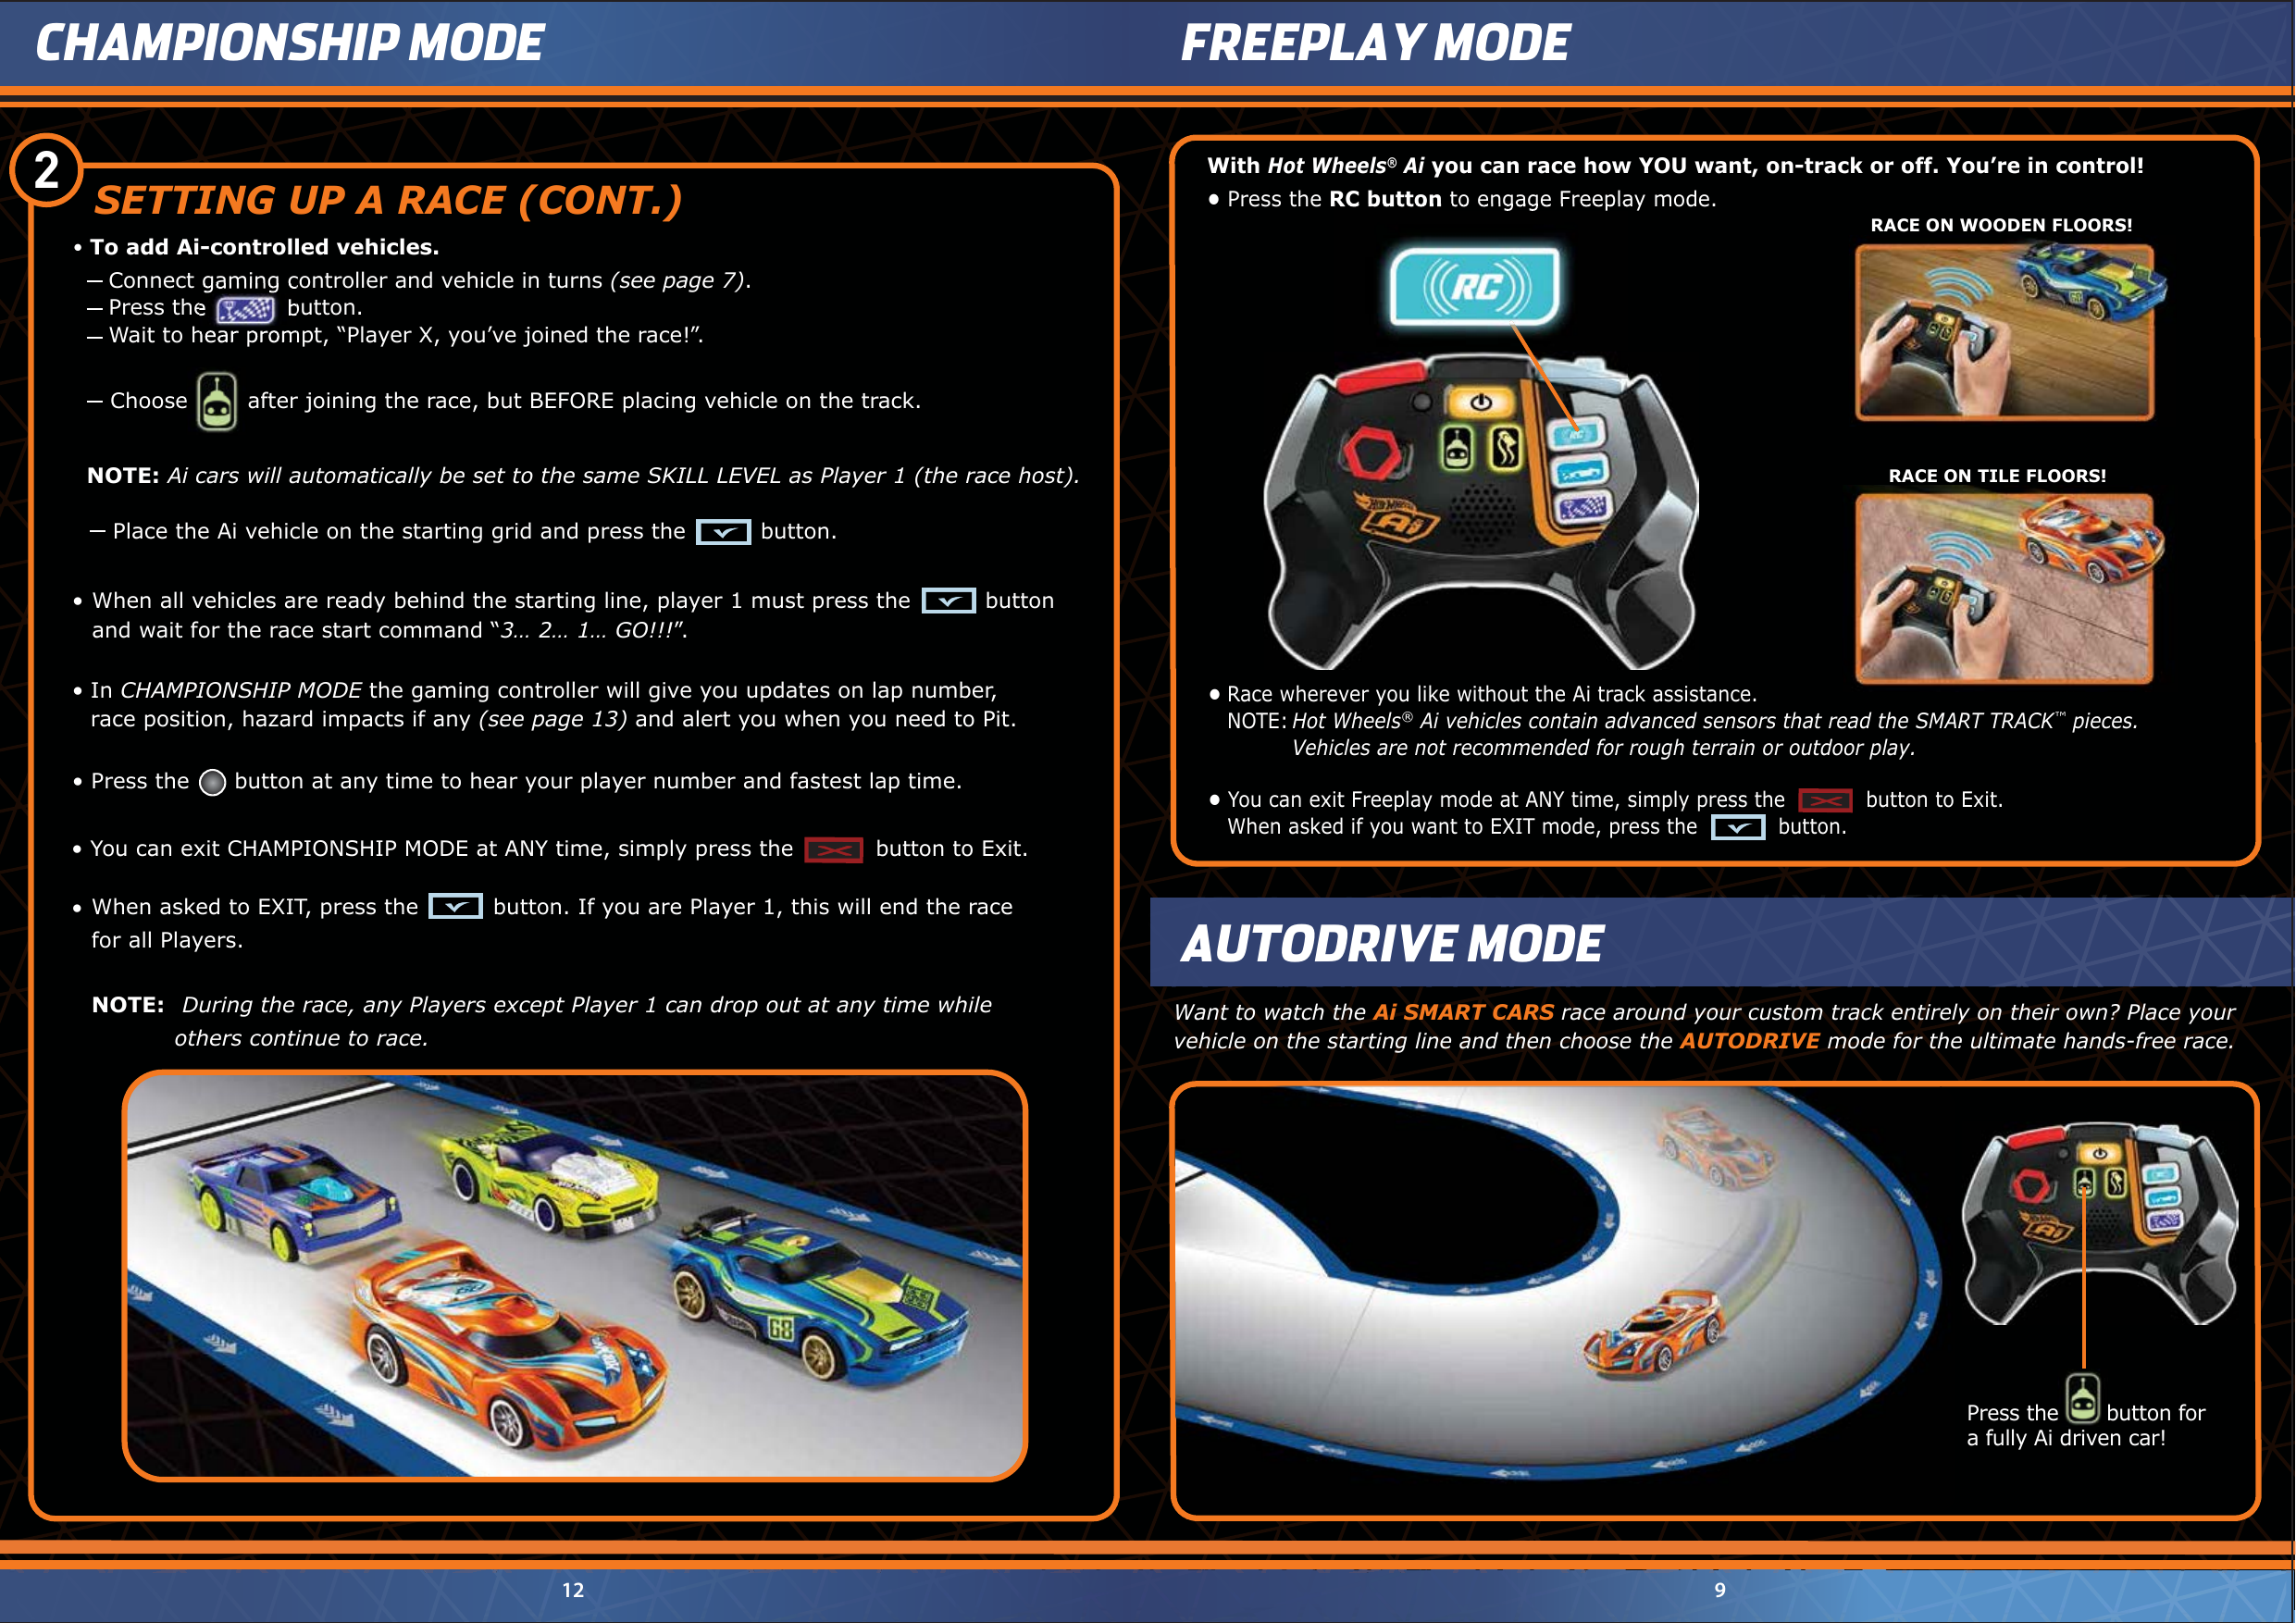 Connect gaming controller and vehicle in turns (see page 7).Press the           button.Wait to hear prompt, “Player X, you’ve joined the race!”.Press the       button fora fully Ai driven car!Press the       button for9CHAMPIONSHIP MODE12FREEPLAY MODEWant to watch the Ai SMART CARS race around your custom track entirely on their own? Place your vehicle on the starting line and then choose the AUTODRIVE mode for the ultimate hands-free race.Connect gaming controller and vehicle in turns Press the           button.Wait to hear prompt, “Player X, you’ve joined the race!”.•To add Ai-controlled vehicles.2    Choose        after joining the race, but BEFORE placing vehicle on the track.•  You can exit CHAMPIONSHIP MODE at ANY time, simply press the           button to Exit.•  Press the      button at any time to hear your player number and fastest lap time.•  In CHAMPIONSHIP MODE the gaming controller will give you updates on lap number,   race position, hazard impacts if any (see page 13) and alert you when you need to Pit.Place the Ai vehicle on the starting grid and press the          button.NOTE: Ai cars will automatically be set to the same SKILL LEVEL as Player 1 (the race host).   Choose        after joining the race, but BEFORE placing vehicle on the track.   When asked to EXIT, press the          button. If you are Player 1, this will end the race  for all Players.  NOTE:  During the race, any Players except Player 1 can drop out at any time while    others continue to race.••  When all vehicles are ready behind the starting line, player 1 must press the          button    and wait for the race start command “3… 2… 1… GO!!!”.SETTING UP A RACE (CONT.)AUTODRIVE MODEWith Hot Wheels® Ai you can race how YOU want, on-track or off. You’re in control!•  Press the RC button to engage Freeplay mode.RACE ON WOODEN FLOORS!RACE ON TILE FLOORS!•  You can exit Freeplay mode at ANY time, simply press the            button to Exit.   When asked if you want to EXIT mode, press the            button.•  Race wherever you like without the Ai track assistance. NOTE: Hot Wheels® Ai vehicles contain advanced sensors that read the SMART TRACK™ pieces.     Vehicles are not recommended for rough terrain or outdoor play.RC button to engage Freeplay mode.